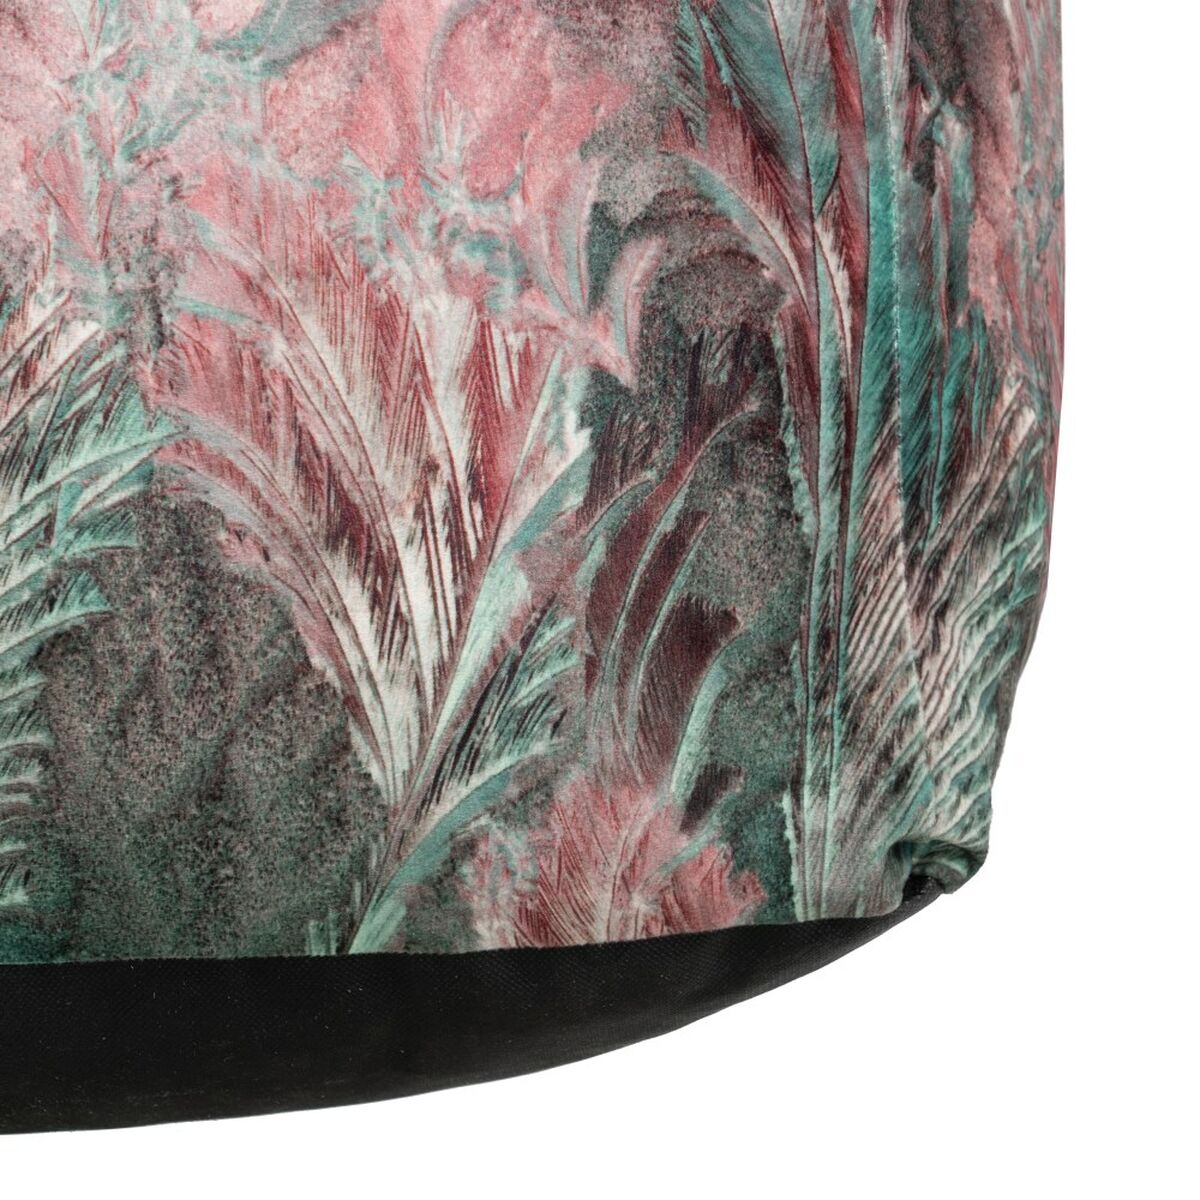 Pouffe Feathers Polyester 60 x 60 x 30 cm